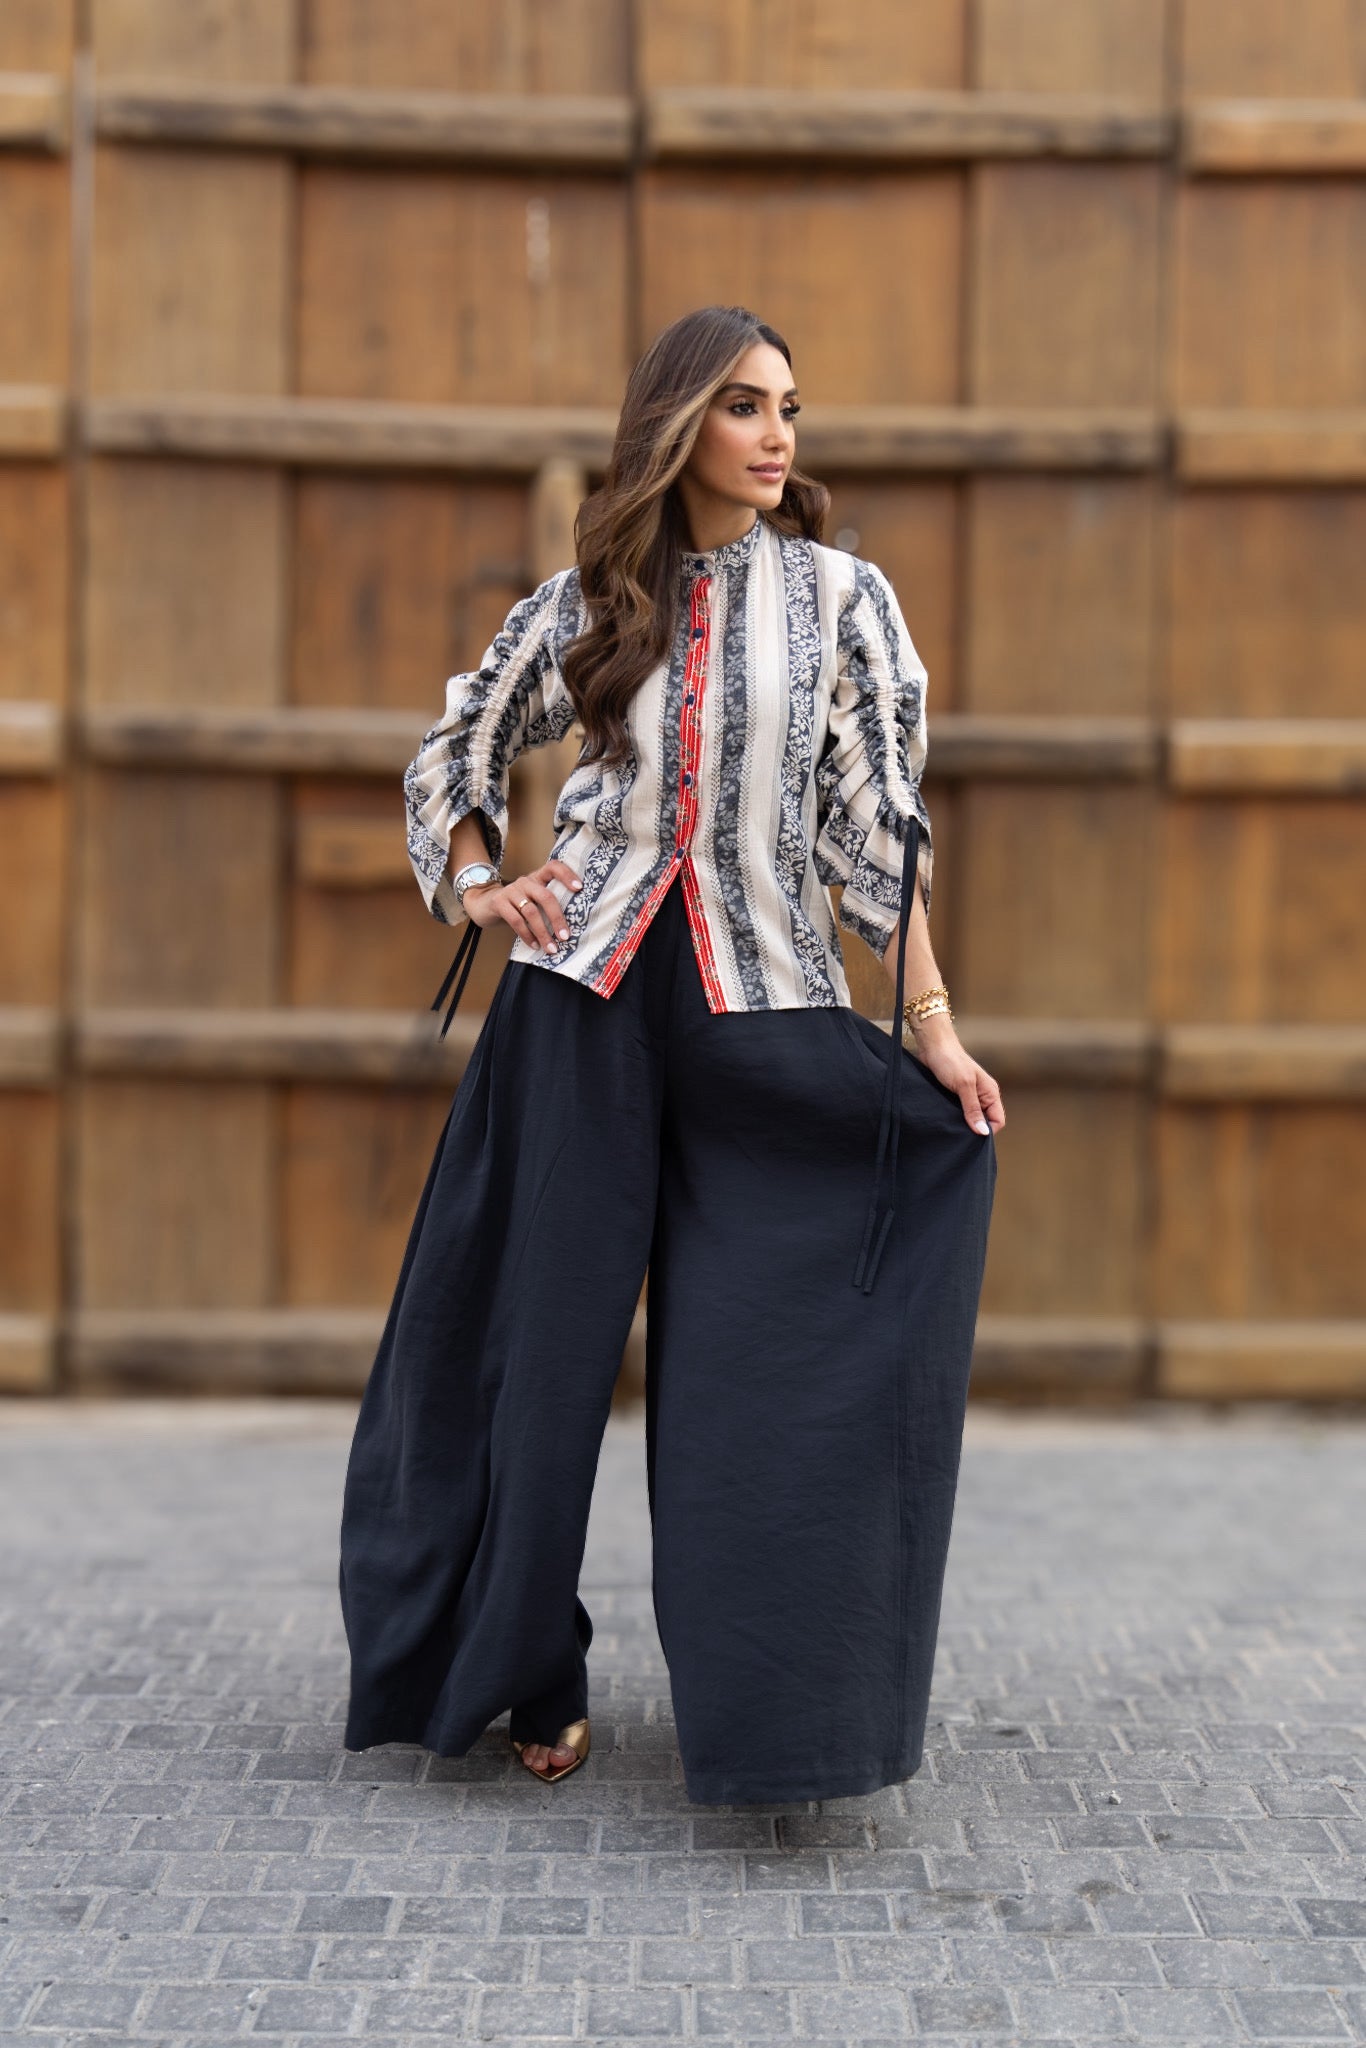 Skirt-style trousers